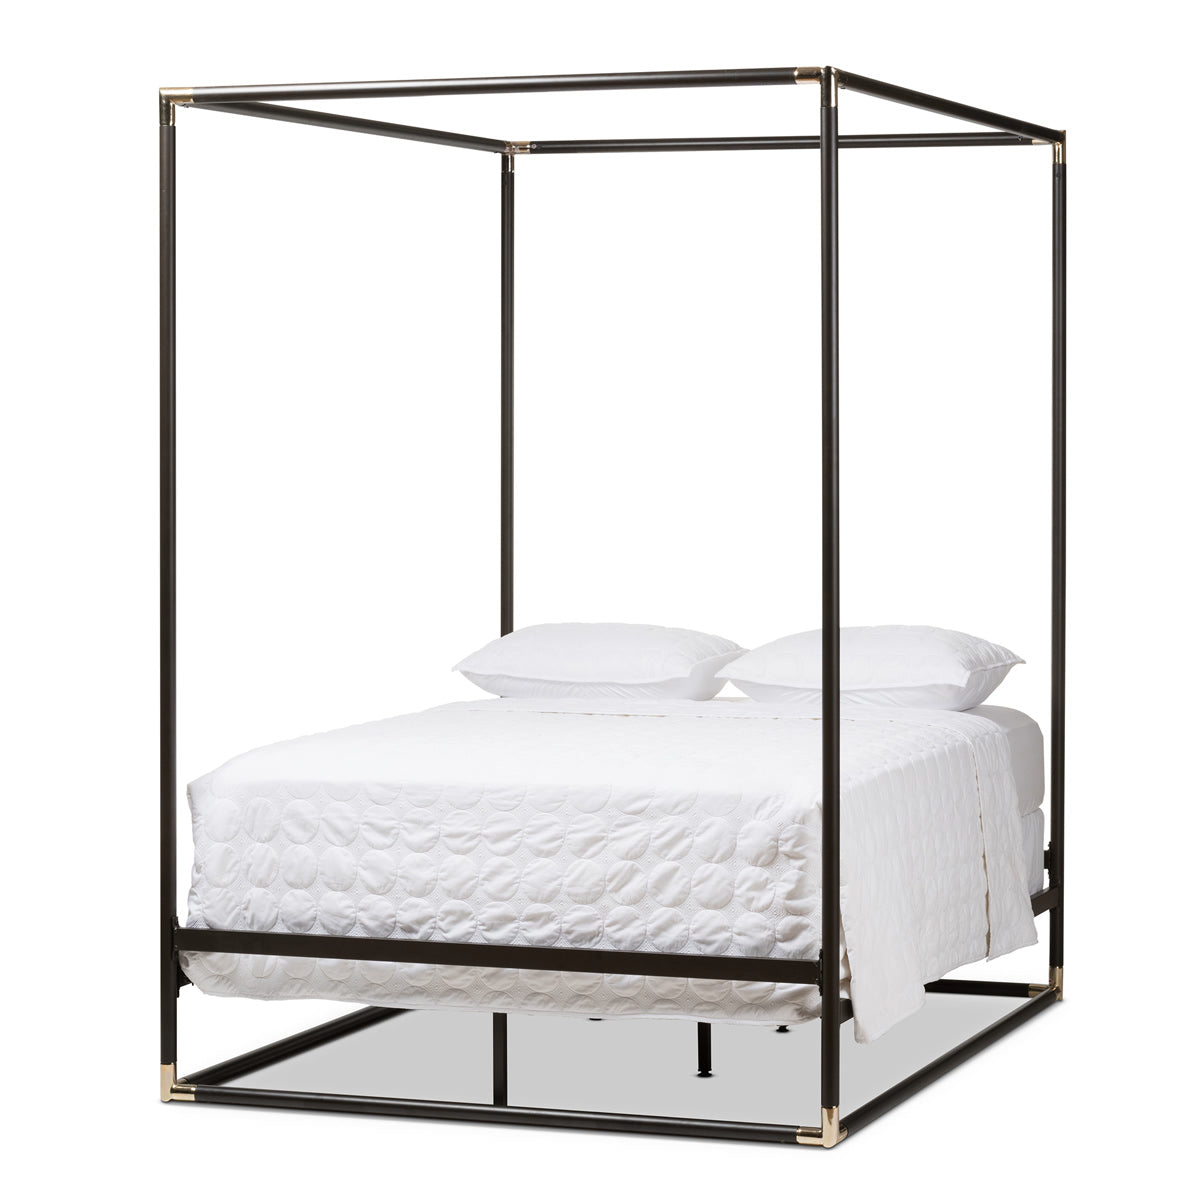 Baxton Studio Eva Vintage Industrial Black Finished Metal Canopy Queen Bed Baxton Studio-Queen Bed-Minimal And Modern - 2